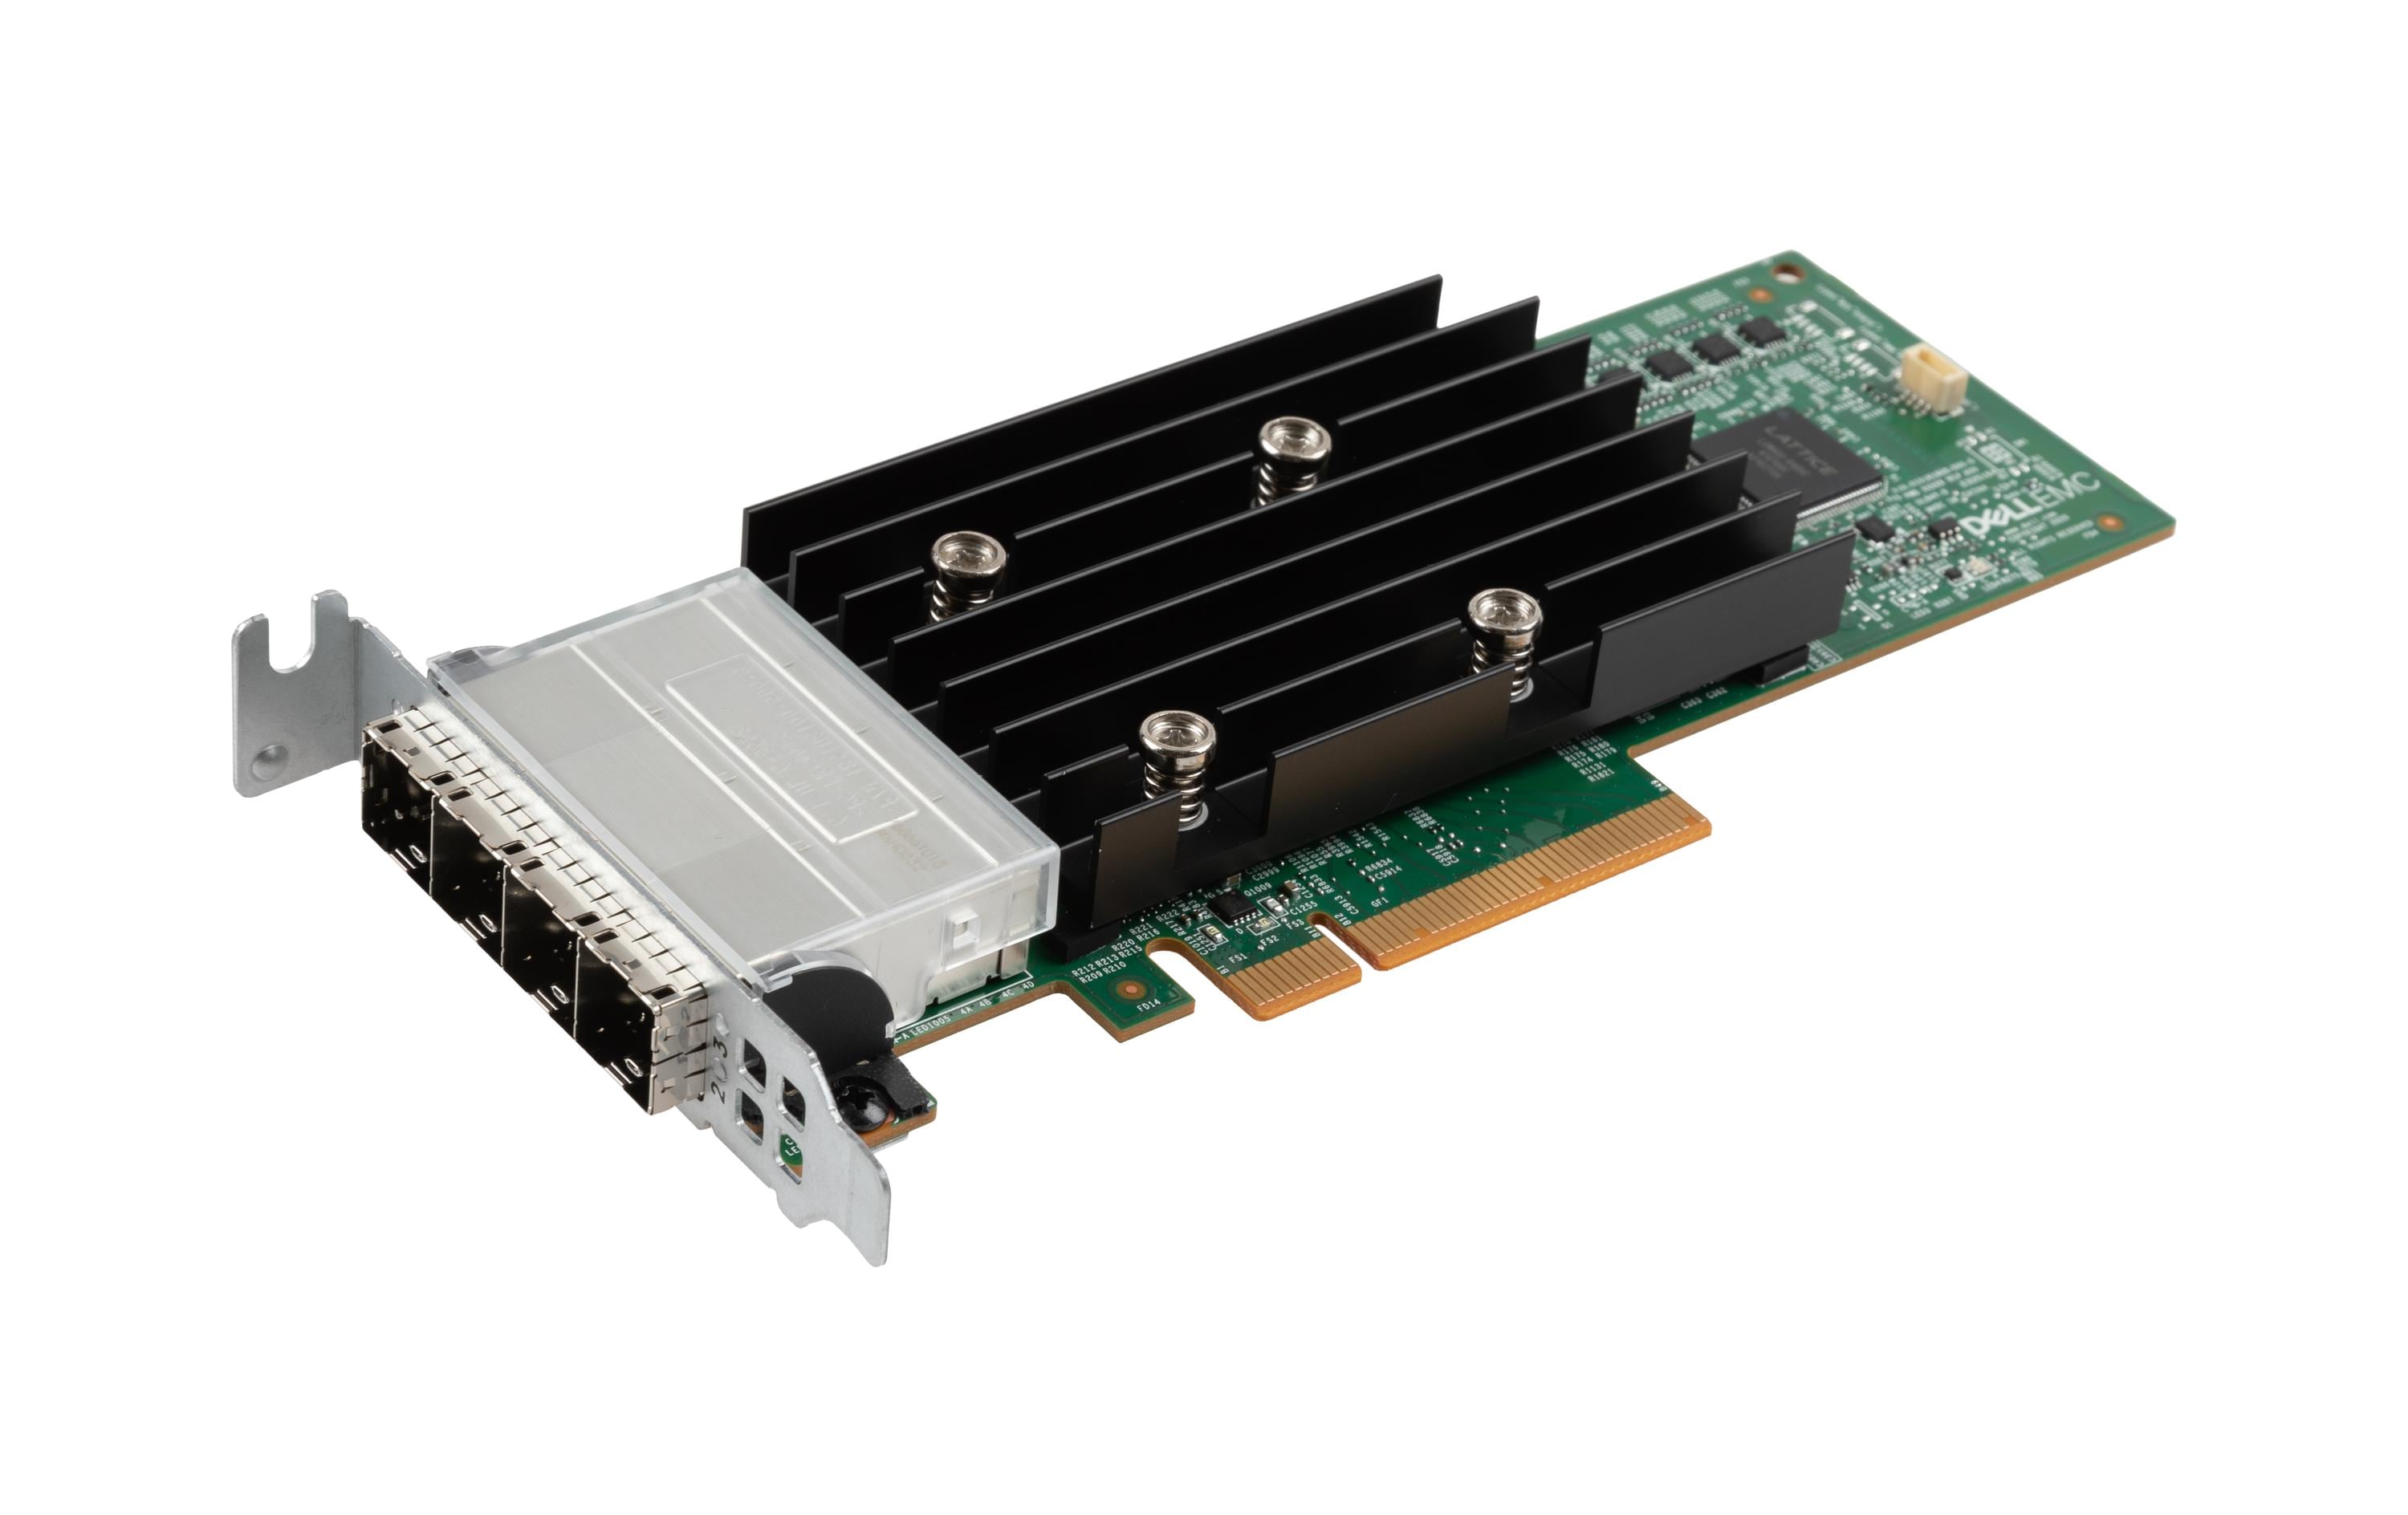 Dell - Customer Install - Hostbus-Adapter - PCIe Low-Profile